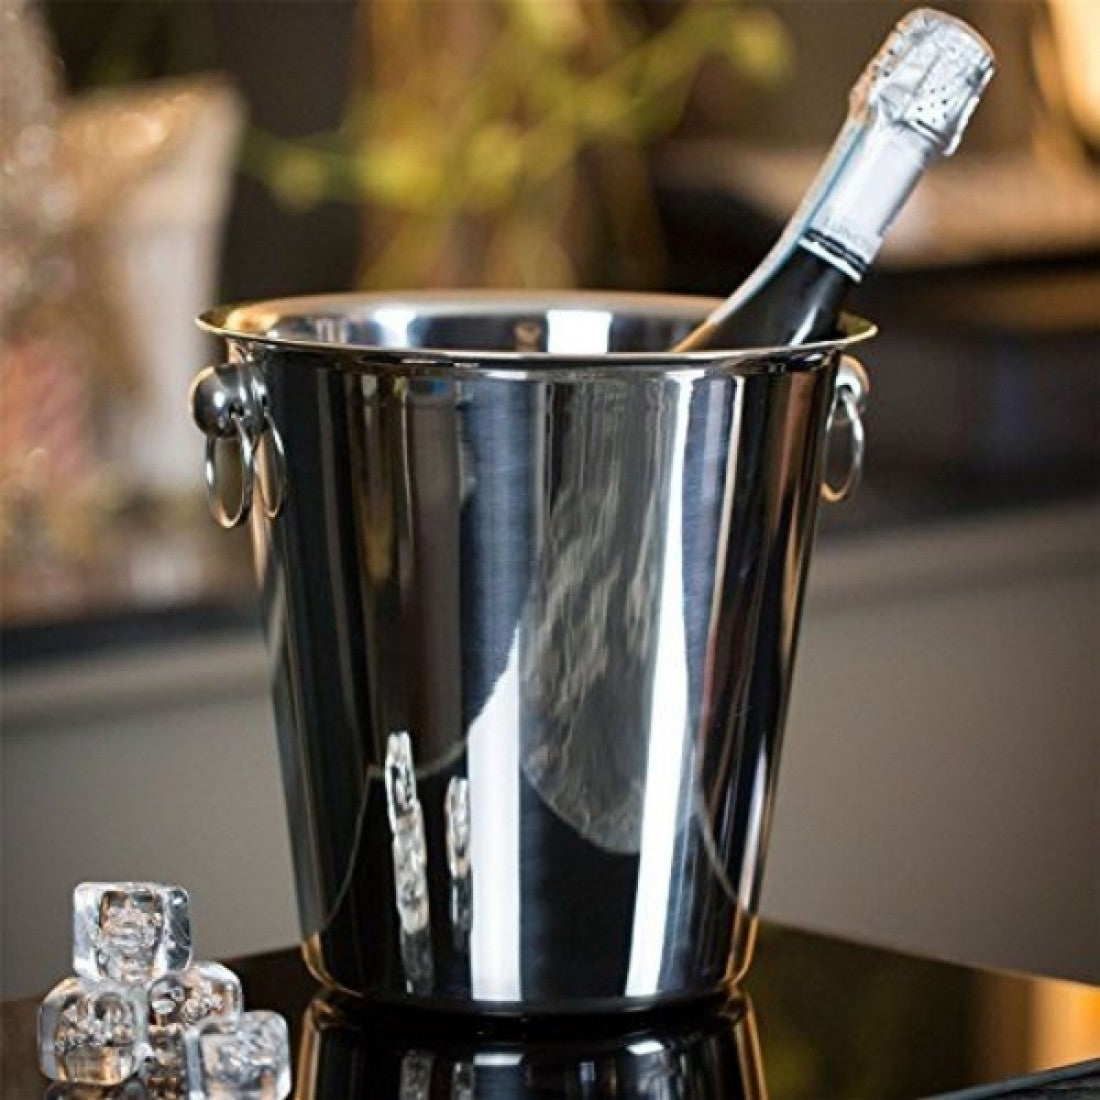 Stainless Steel Ice Bucket 22x21.5cm with Knob SS317